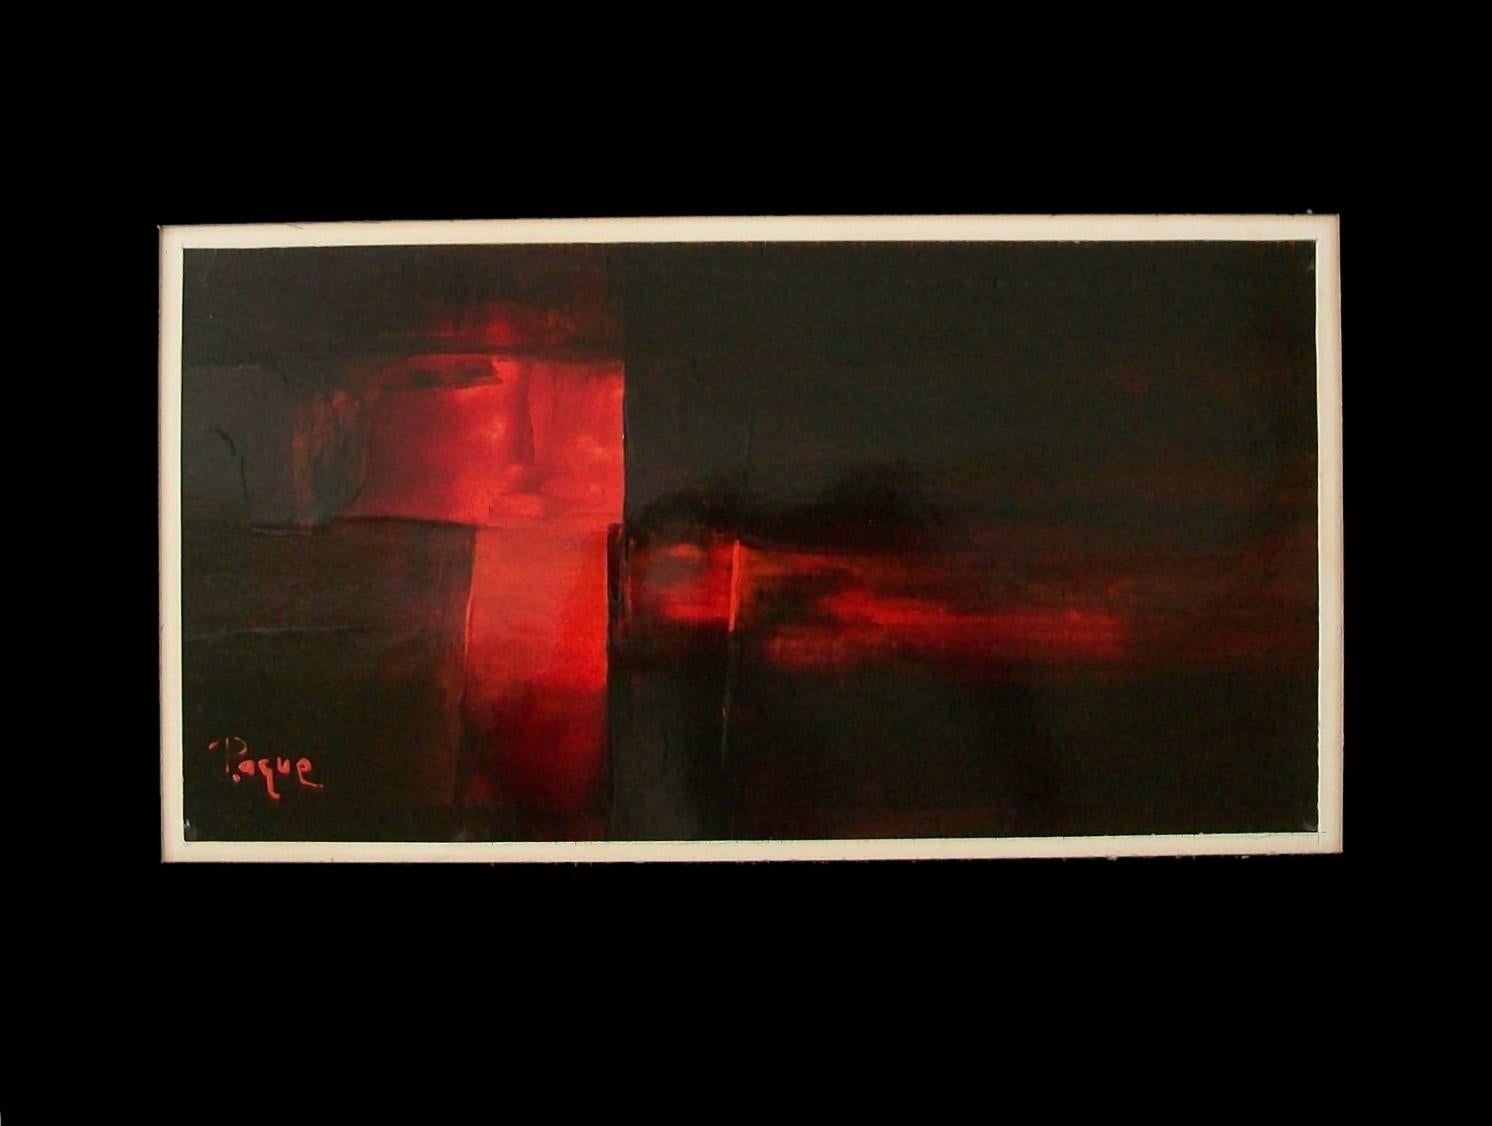 Canadian Serge Paquet 'Paque', Midcentury Abstract Painting, Canada, circa 1970s For Sale